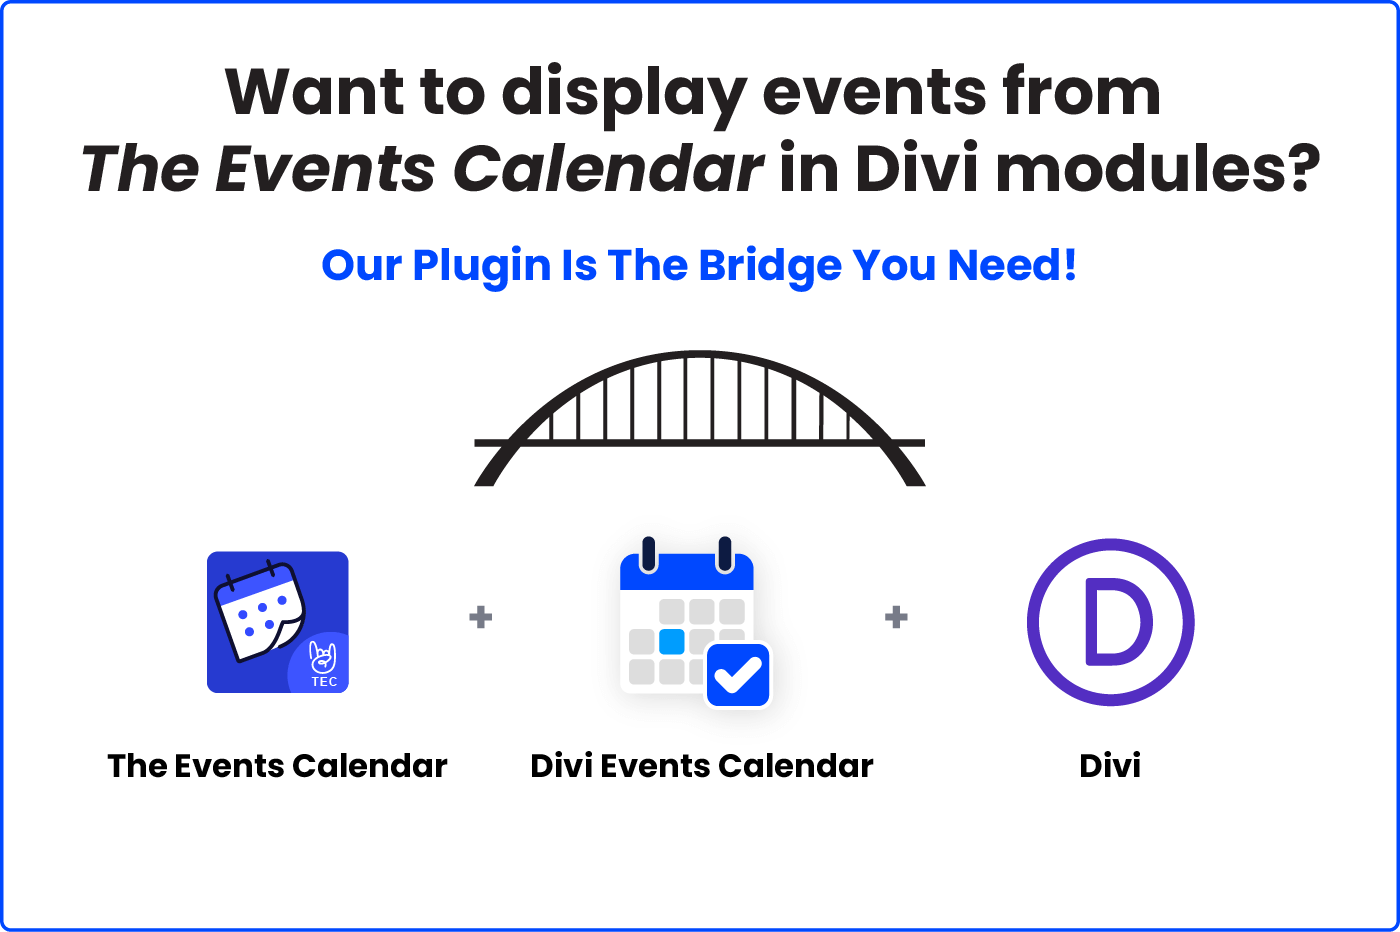 Connection between The Events Calendar and Divi Events Calendar